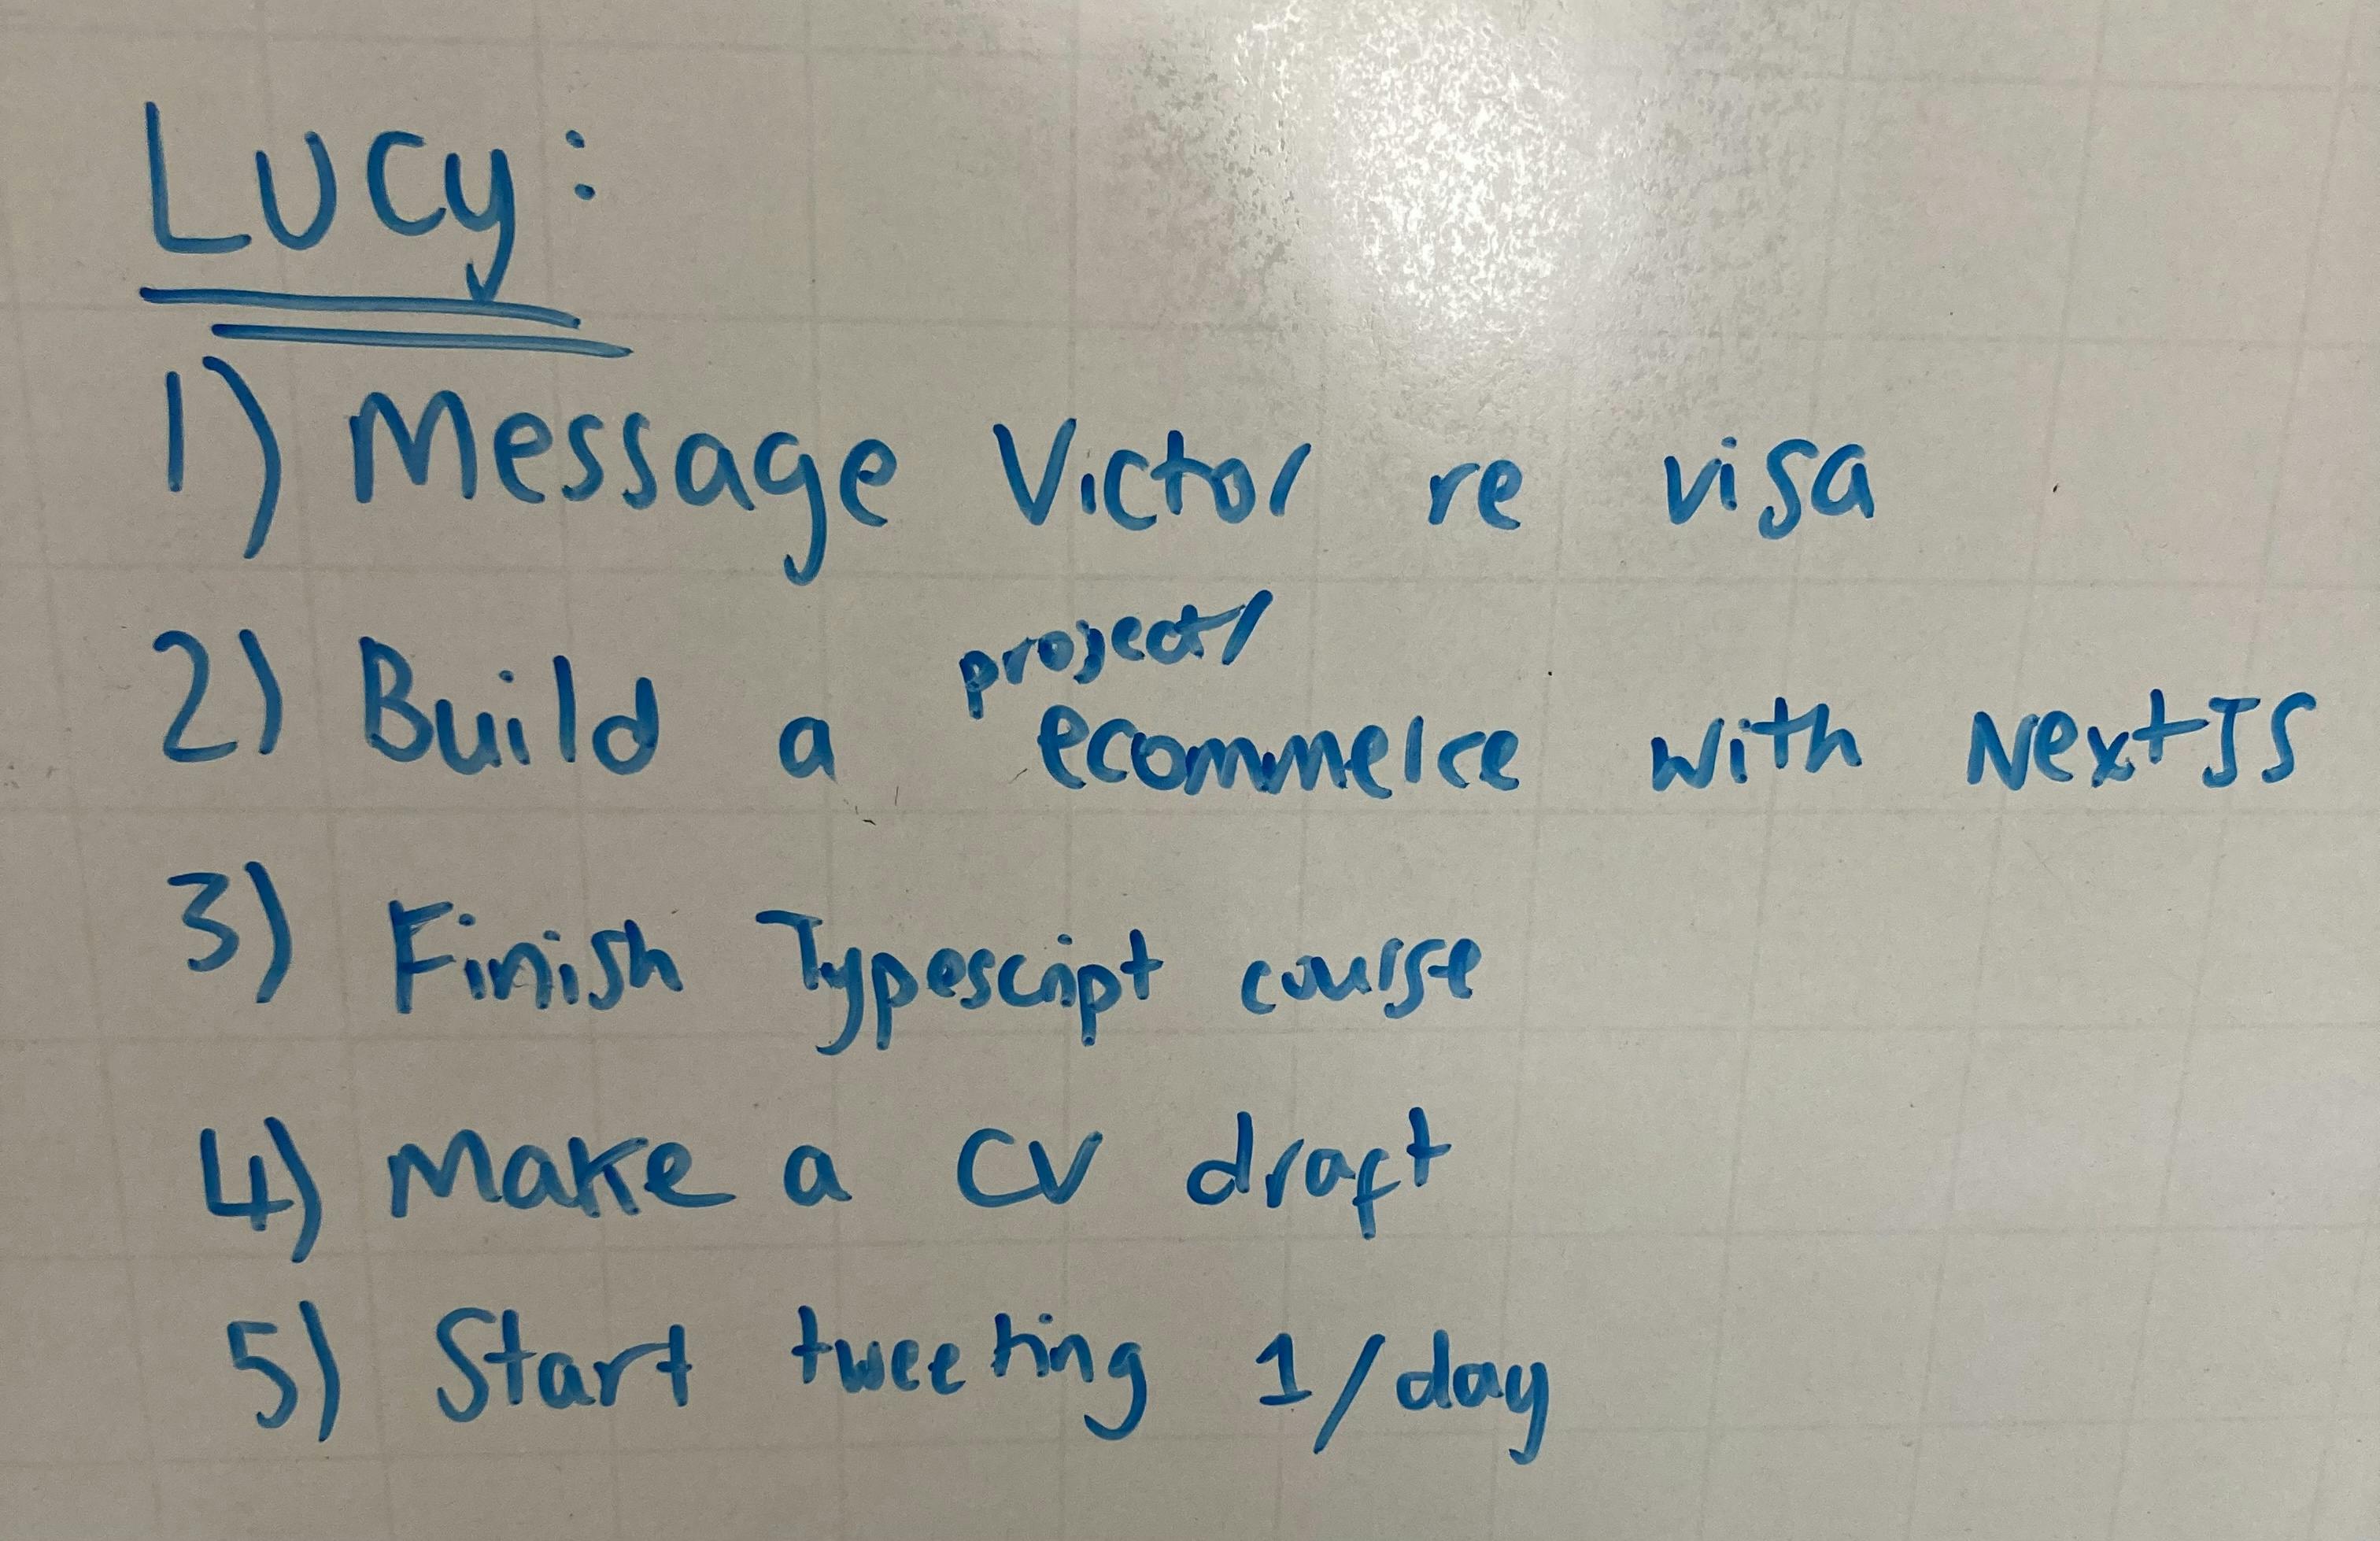 My goals from my whiteboard: 1) Message Victor re visa. 2) Build a project / e-commerce with NextJS. 3) Finish Typescript course. 4) Make a CV draft. 5) Start tweeting once a day